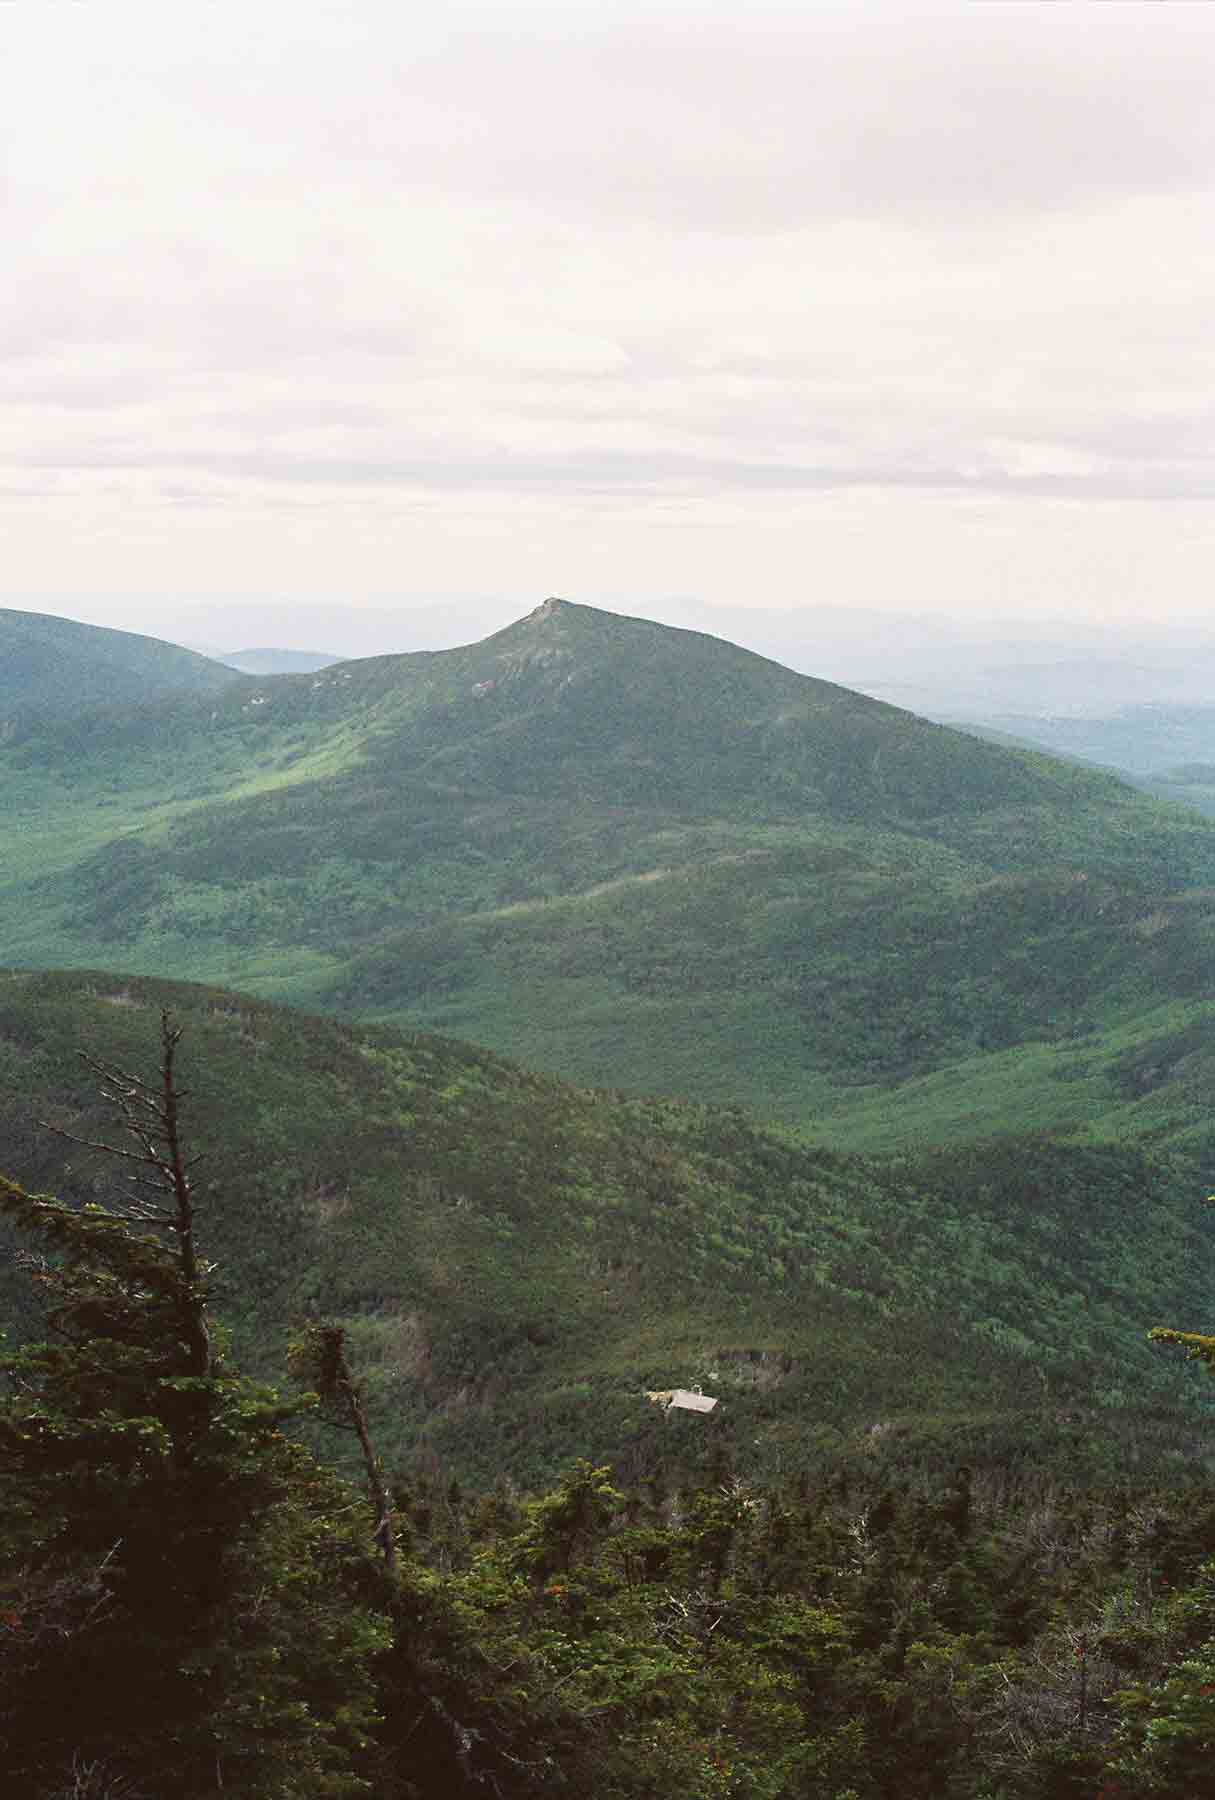 mm 13.9 - View along Garfield Ridge from South Twin. Galehead Hut, one trail mile and a 1100 foot descent away, is visible.  Courtesy dlcul@conncoll.edu